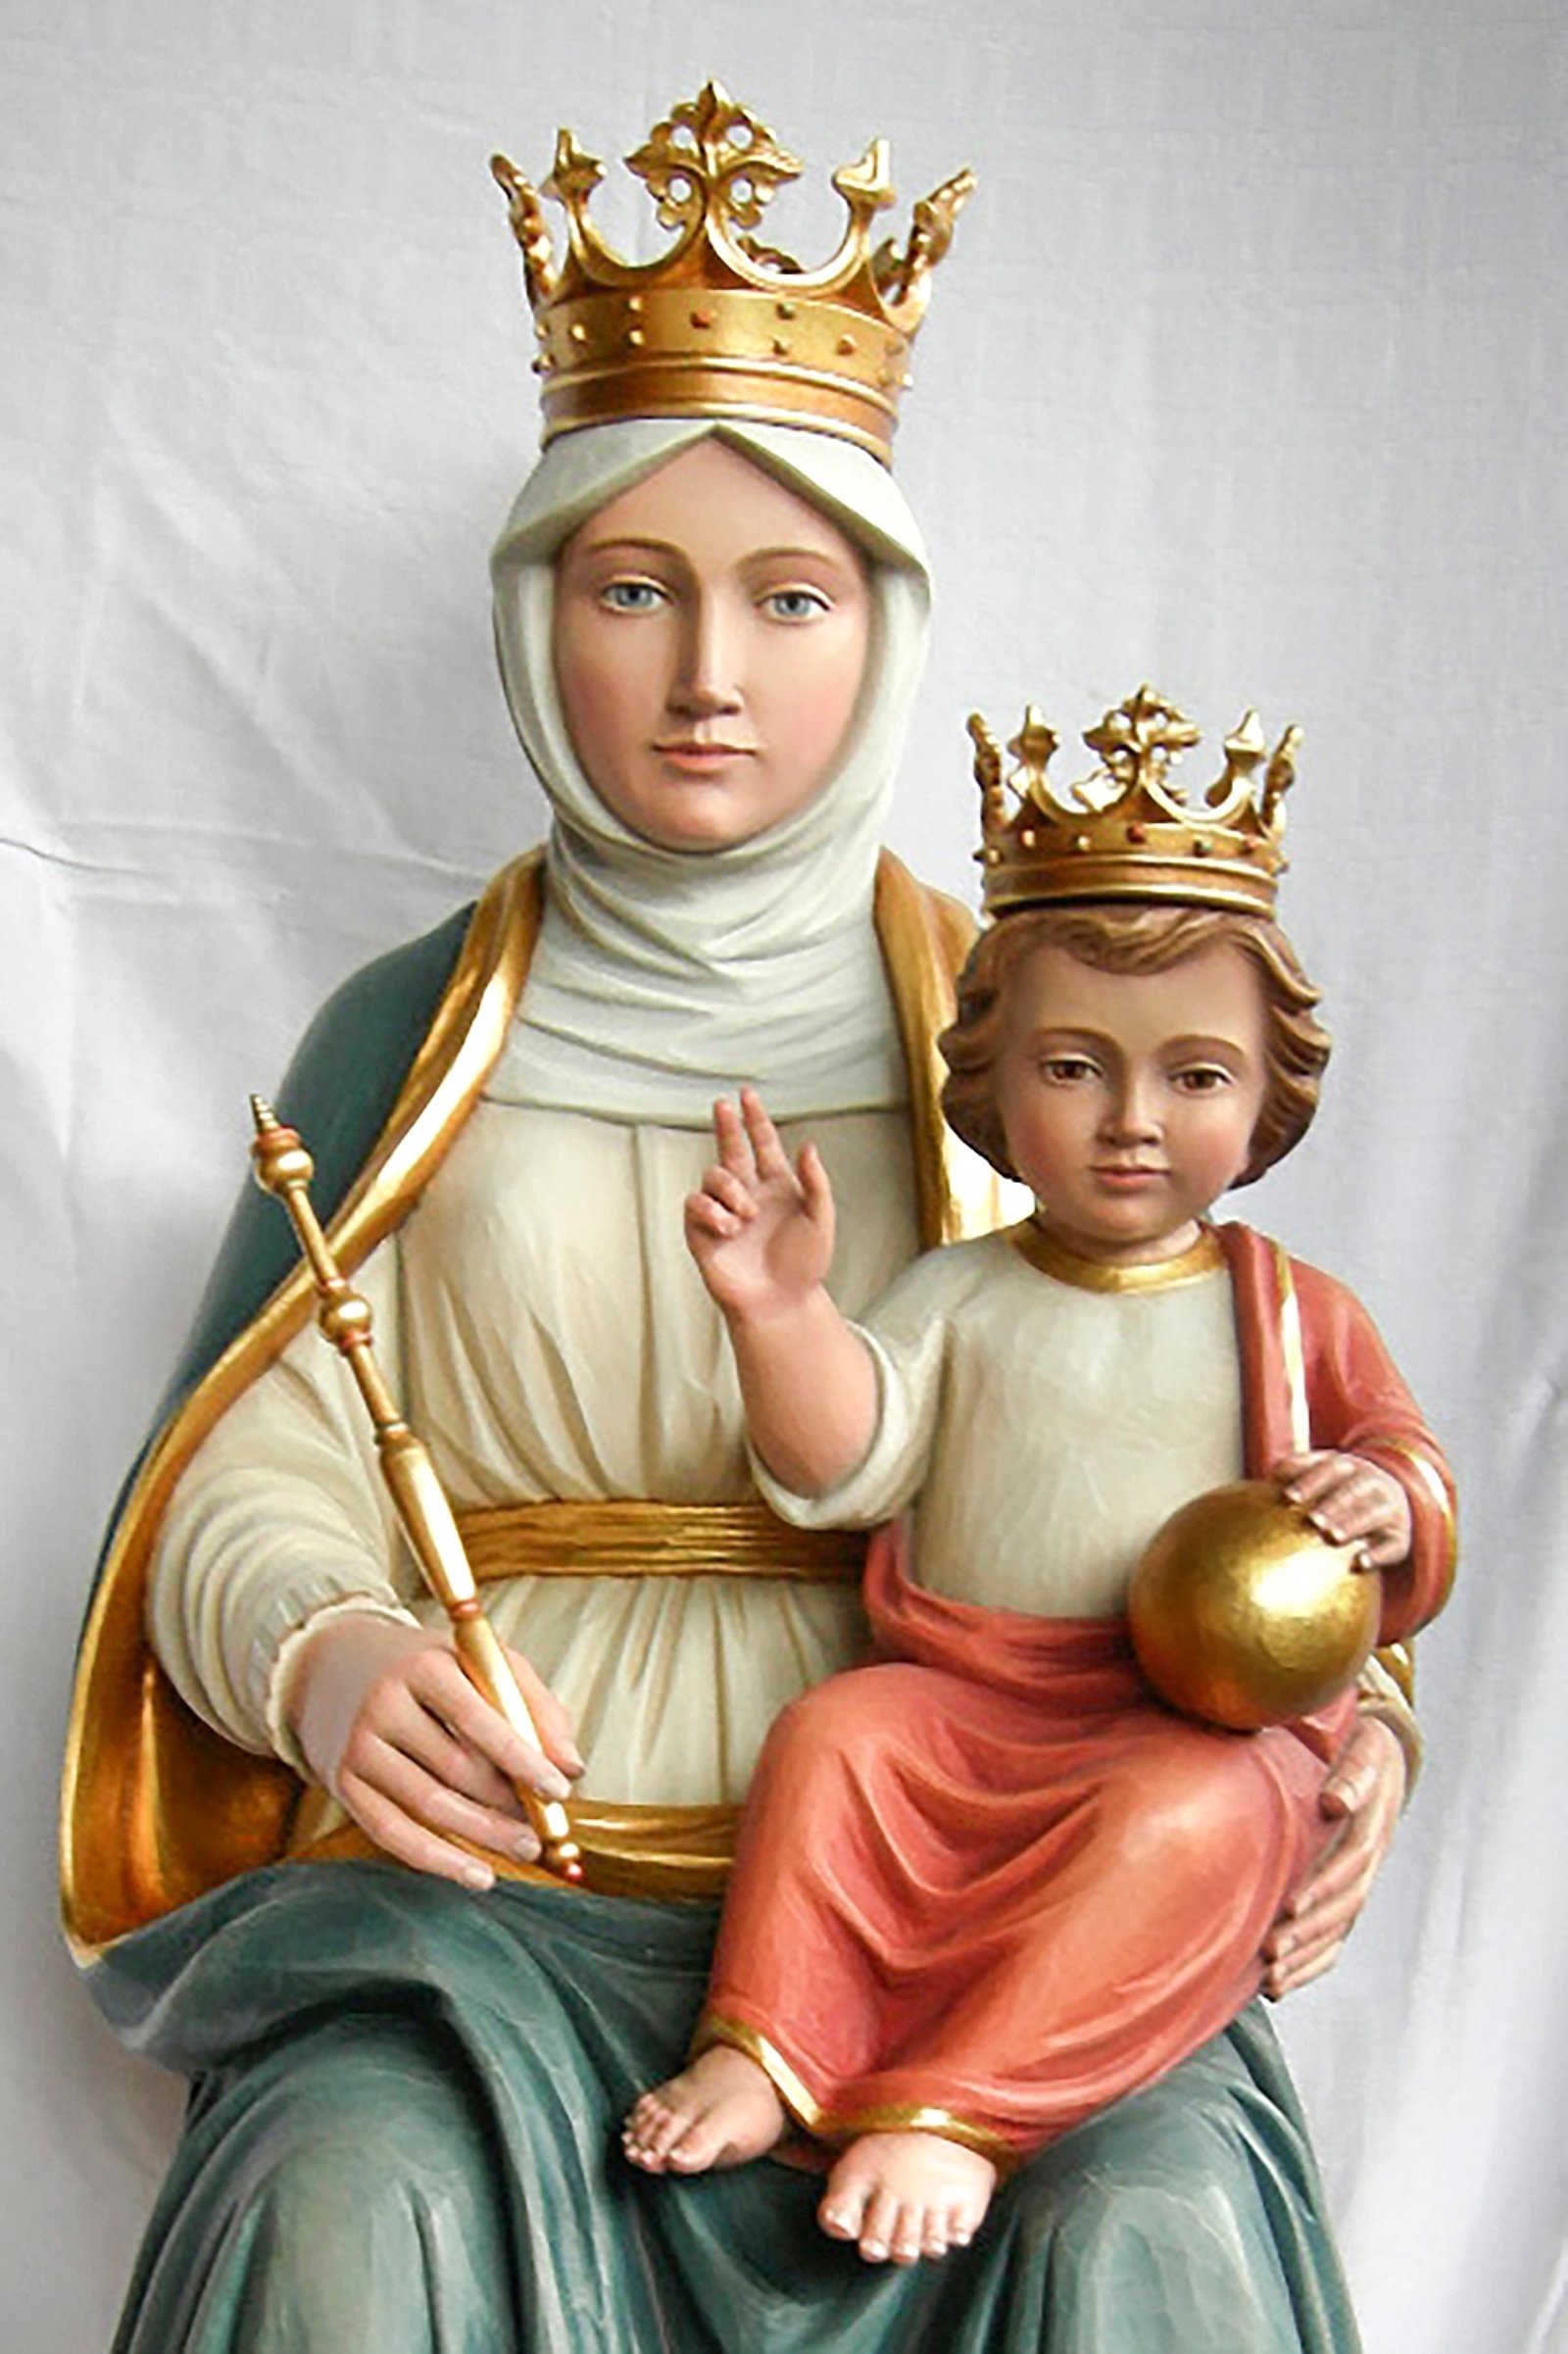 Our Lady seated